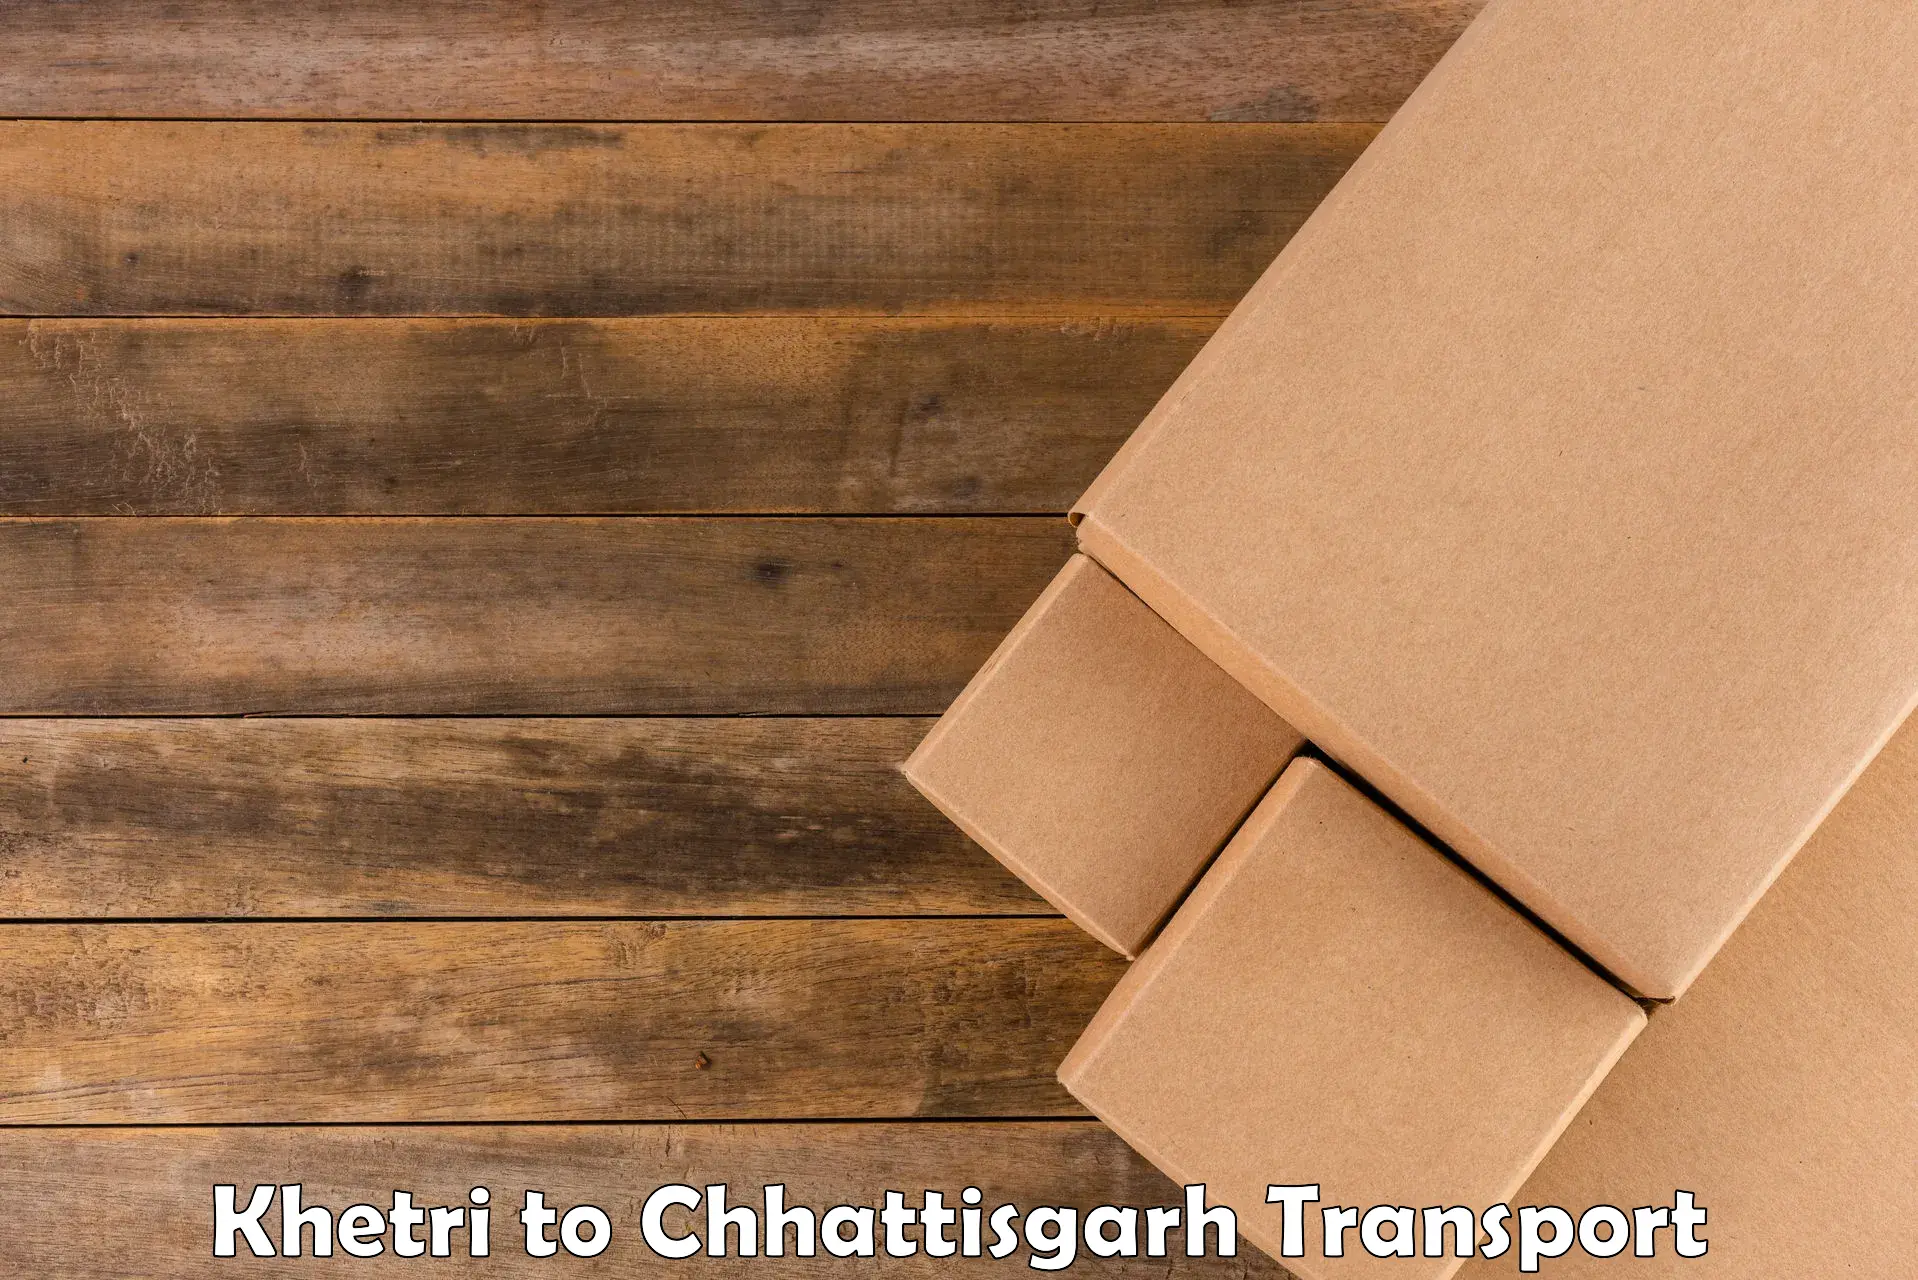 Air freight transport services Khetri to Durg